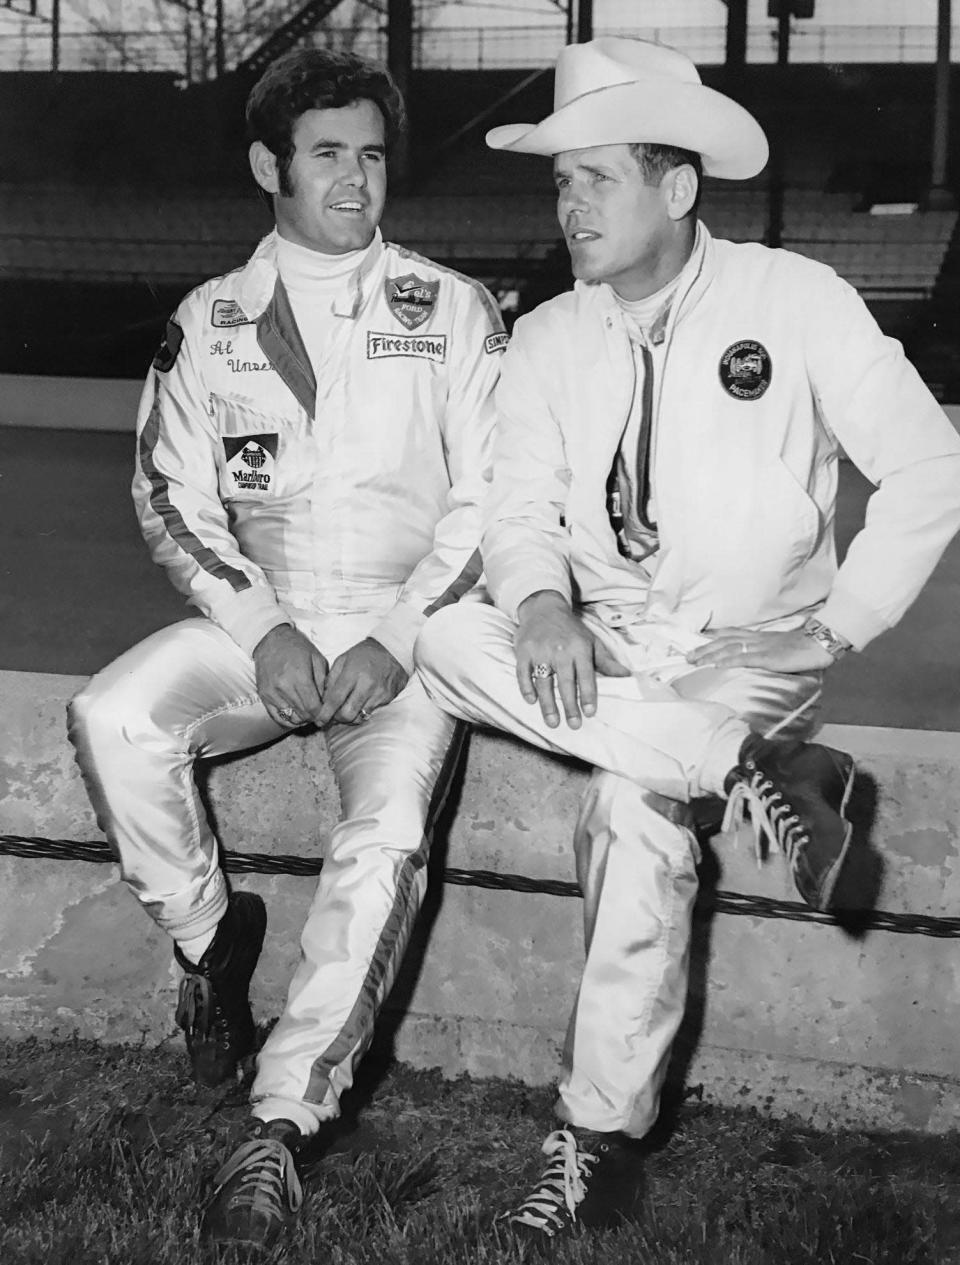 Al, left, and brother Bobby Unser prepare for the Indiana Classic 100-mile USAC stock car race at the Indiana StateFairgrounds in 1972.